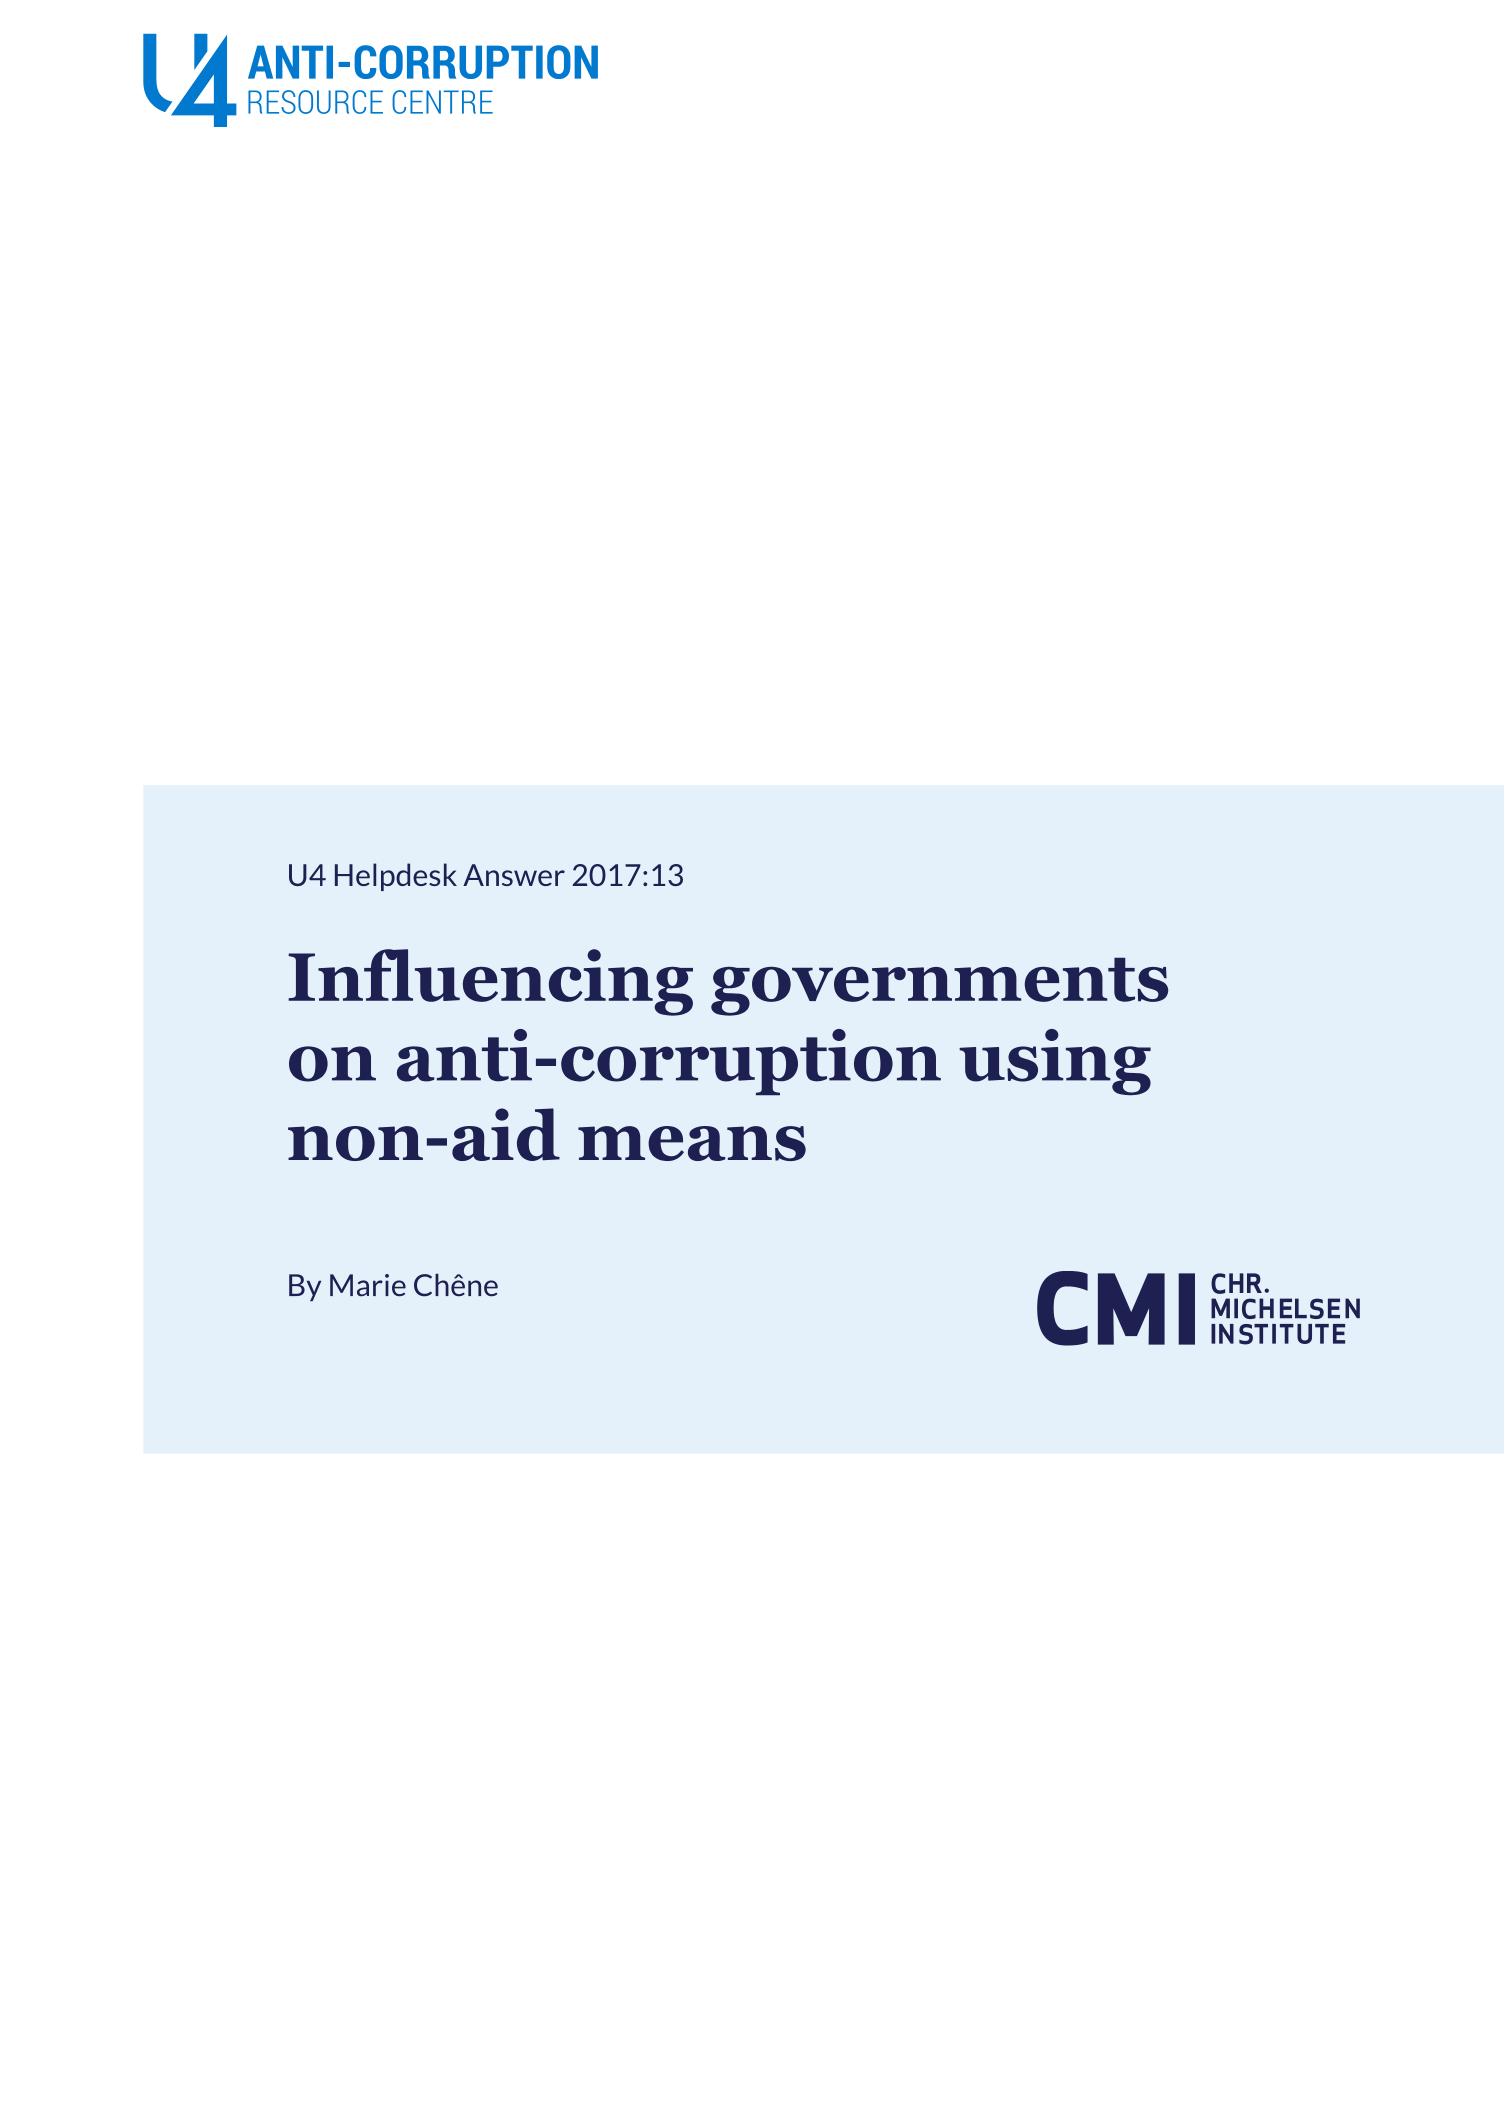 Influencing governments on anti-corruption using non-aid means